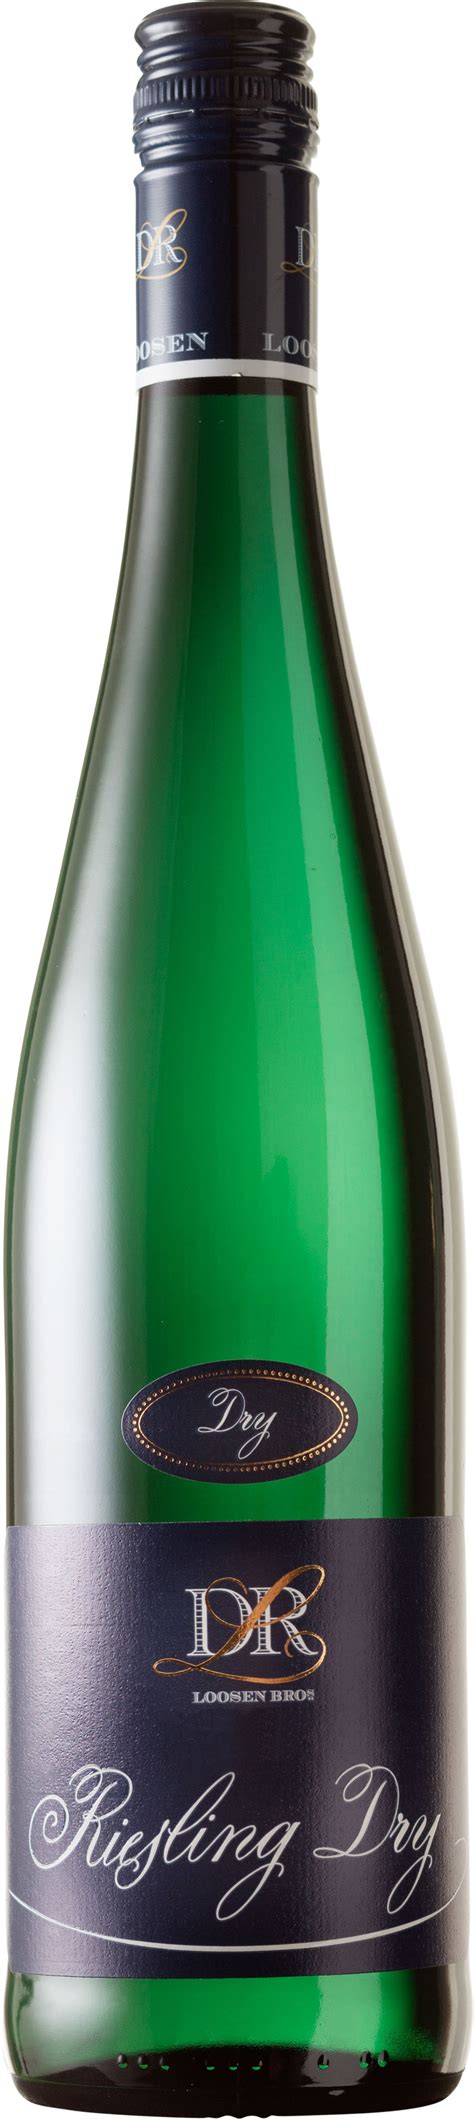 Dry riesling. This dry Riesling shows an enticing mix of ripe lemon, apple and peach matched with lime zest and crushed stone on the nose. The zesty palate echoes the nose, with a pretty accent of white-blossom perfume lending depth. From start to finish, this is lifted, balanced and utterly enjoyable. — Alexander Peartree 